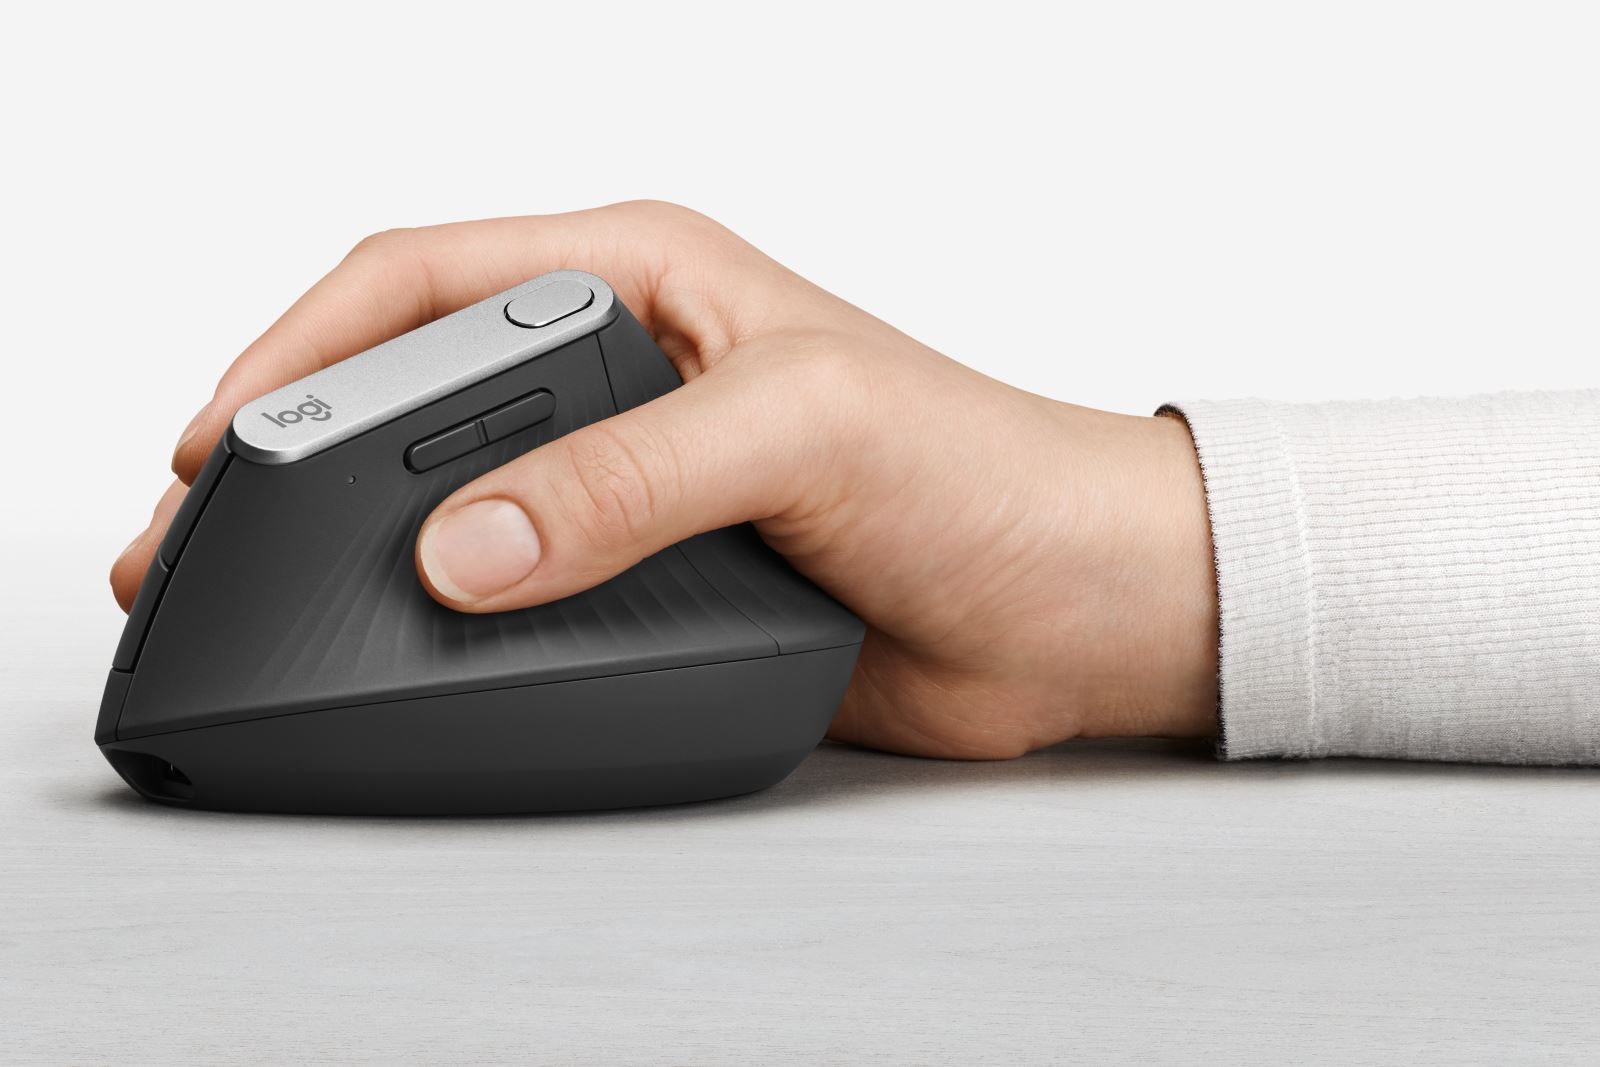 Logitechs latest mouse is designed to solve mouse wrist image 1